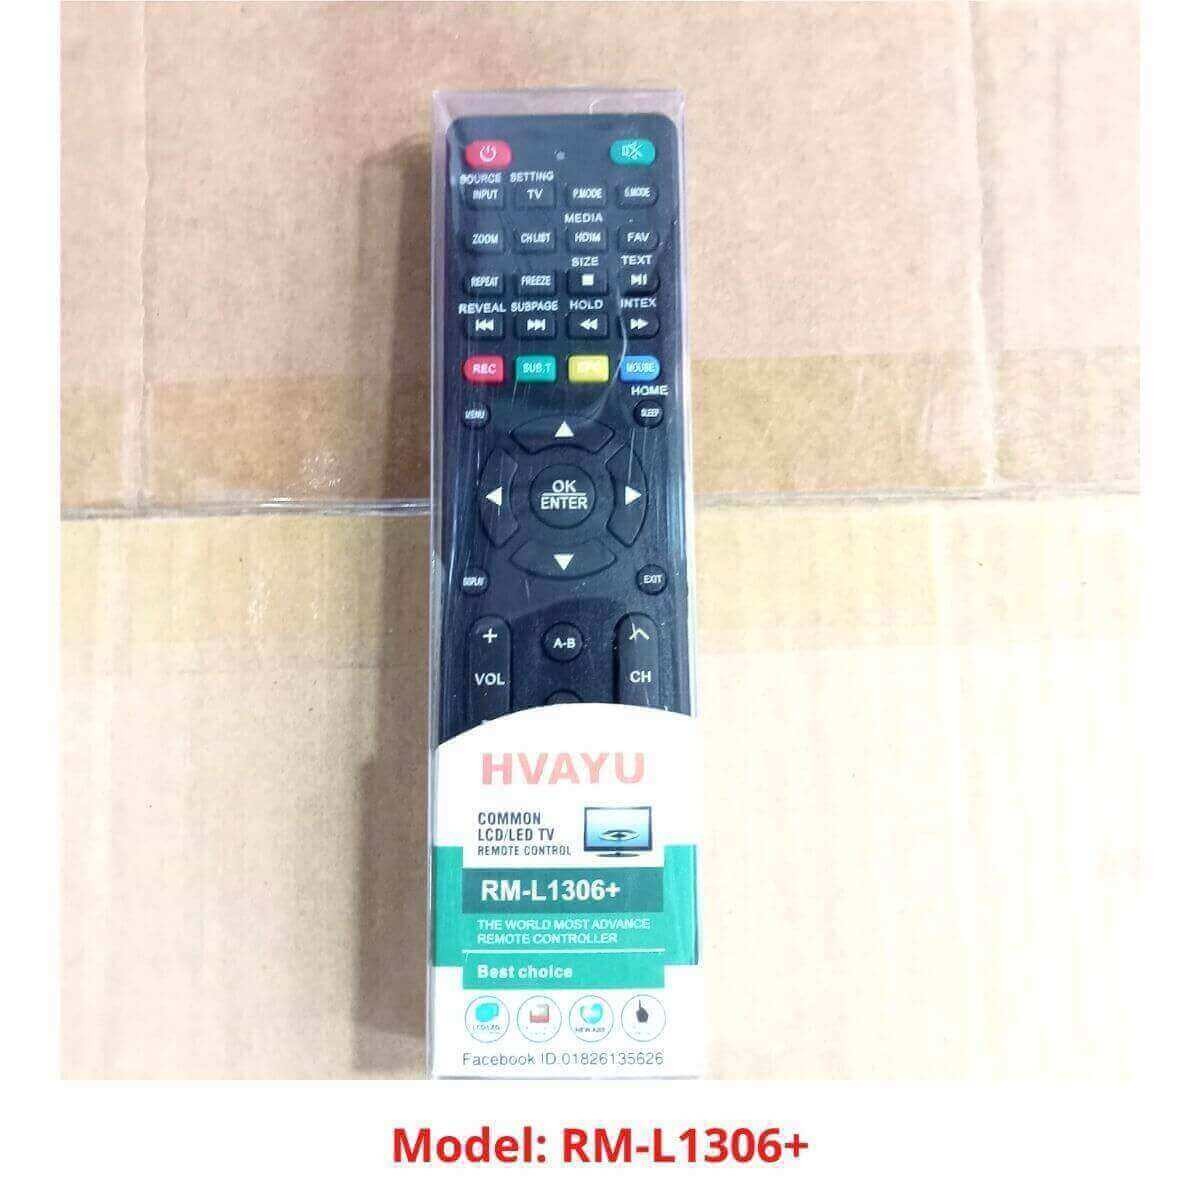 COMMON LCD LED TV REMOTE RM-L1306+ BD